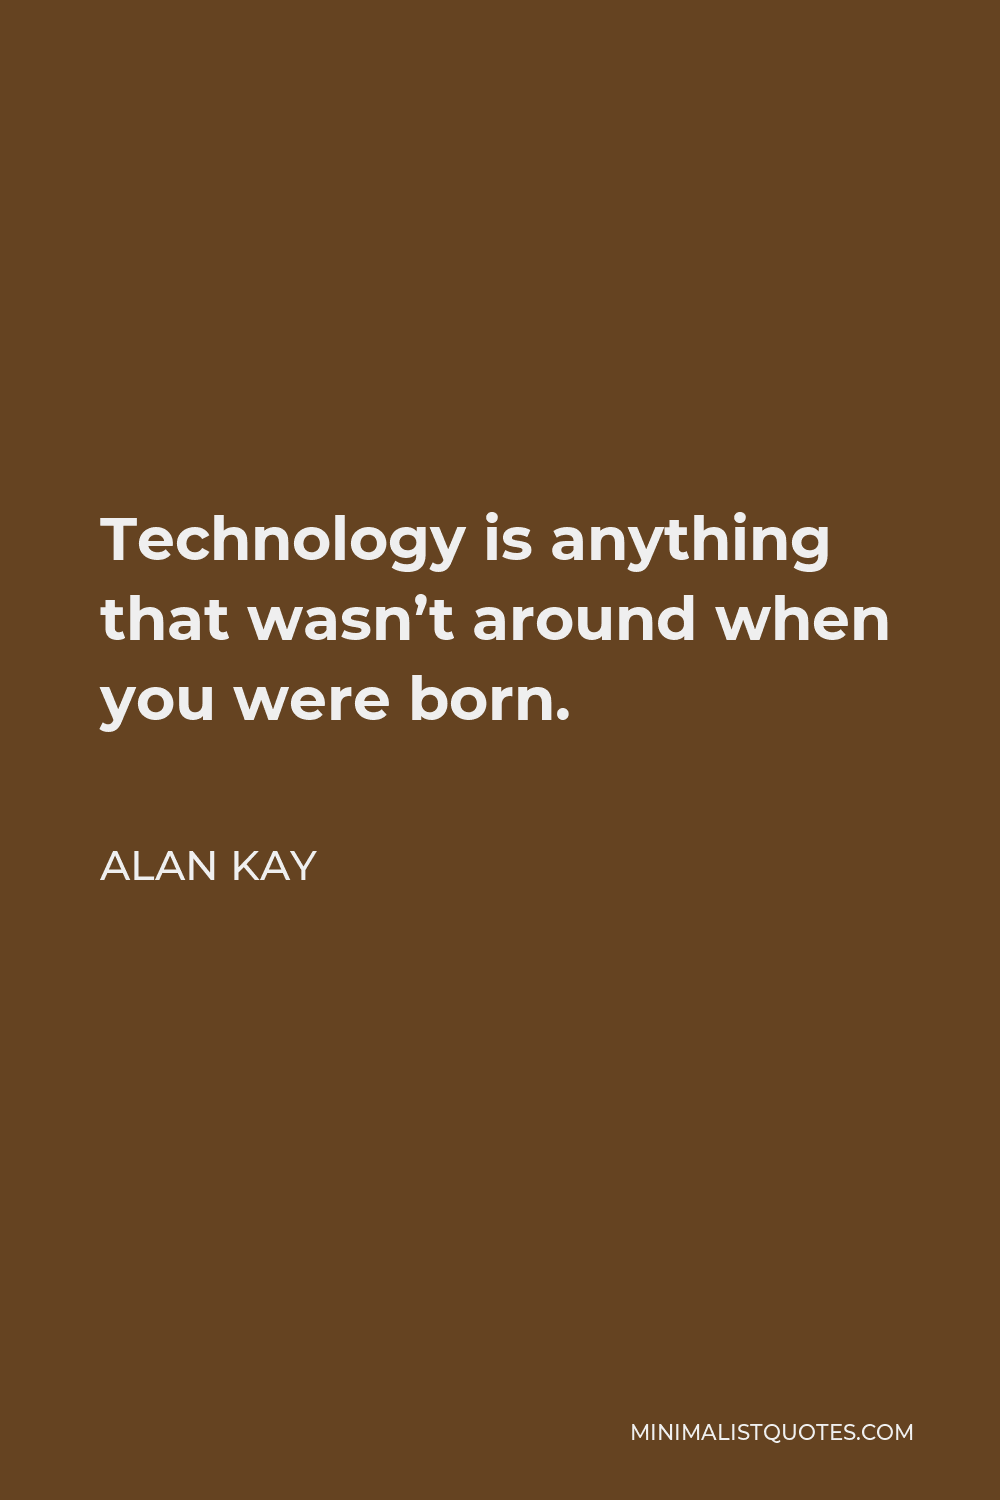 Alan Kay Quote - Technology is anything that wasn’t around when you were born.